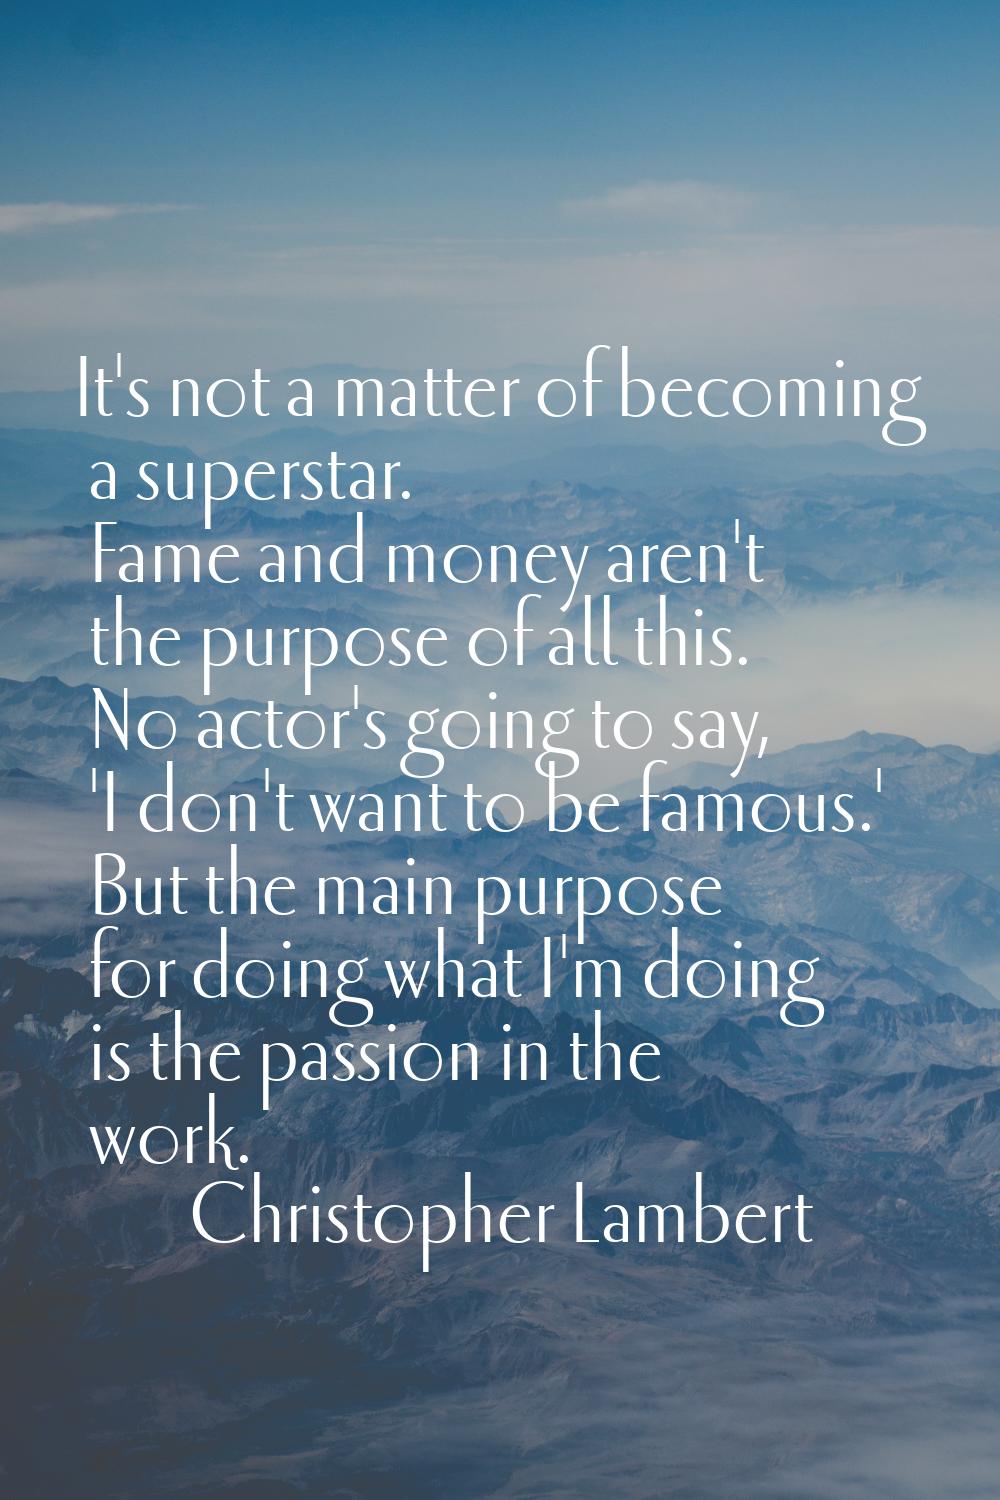 It's not a matter of becoming a superstar. Fame and money aren't the purpose of all this. No actor'